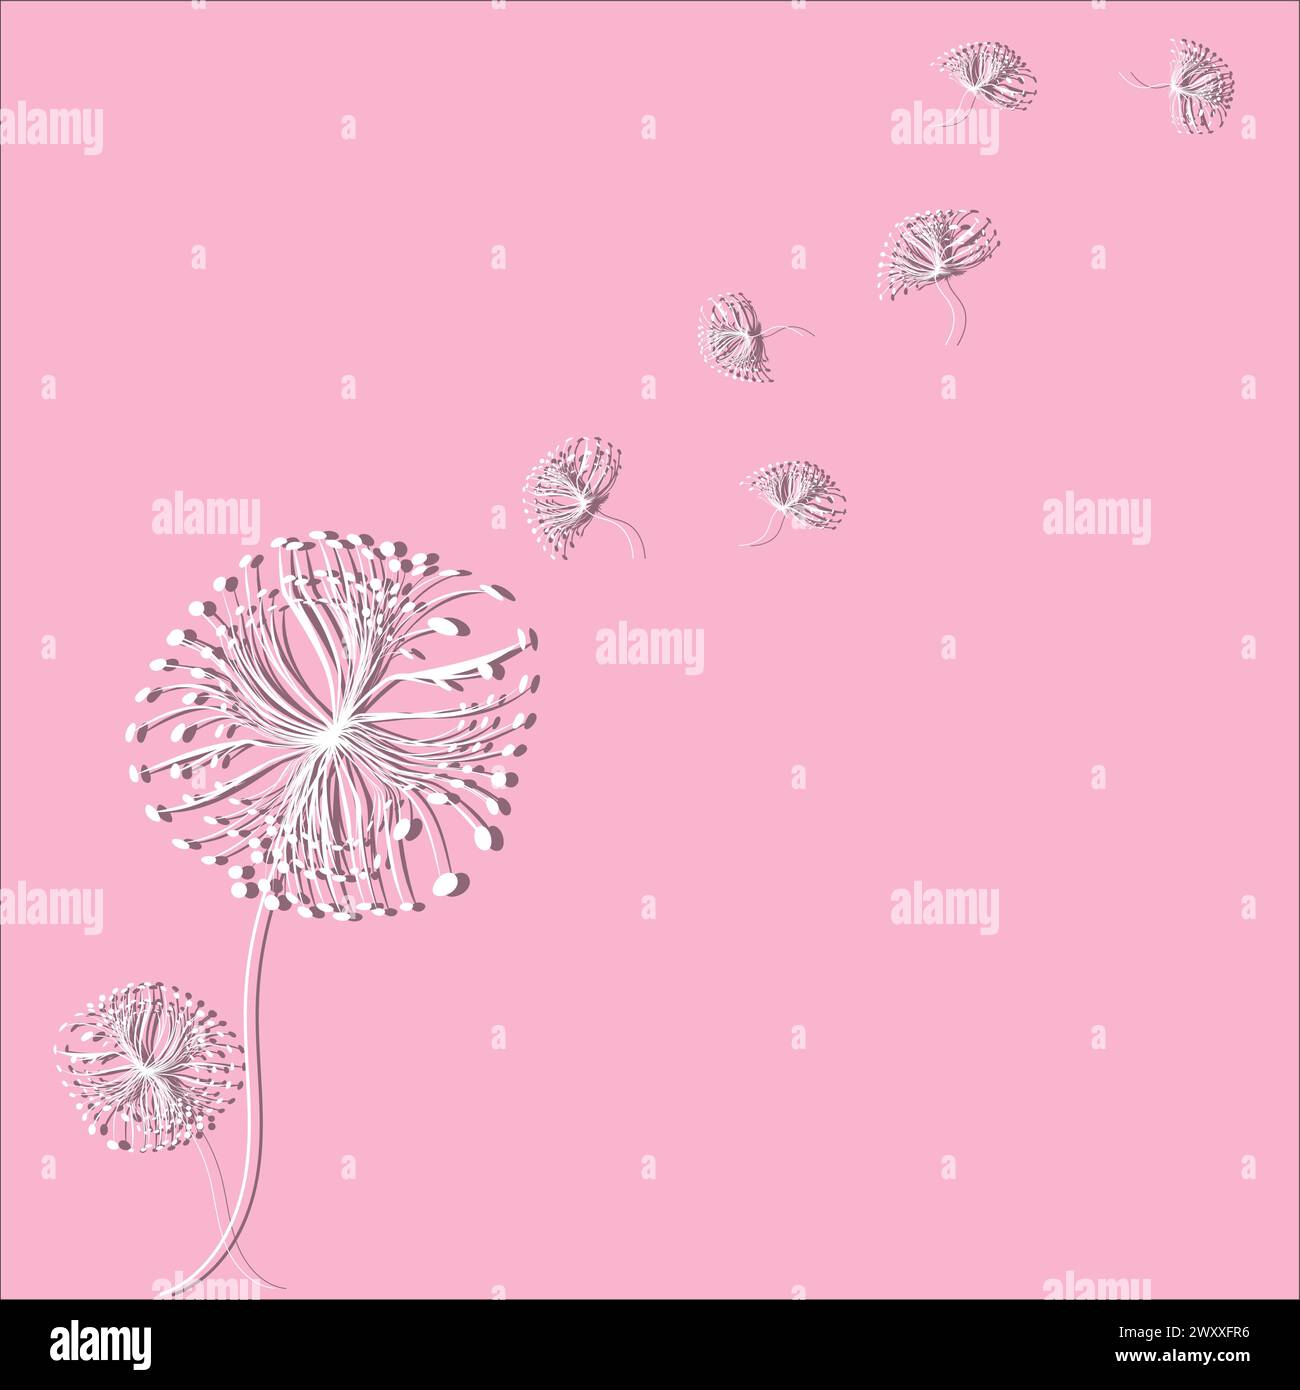 A close-up of a white dandelion puff against a soft pink background. Stock Vector